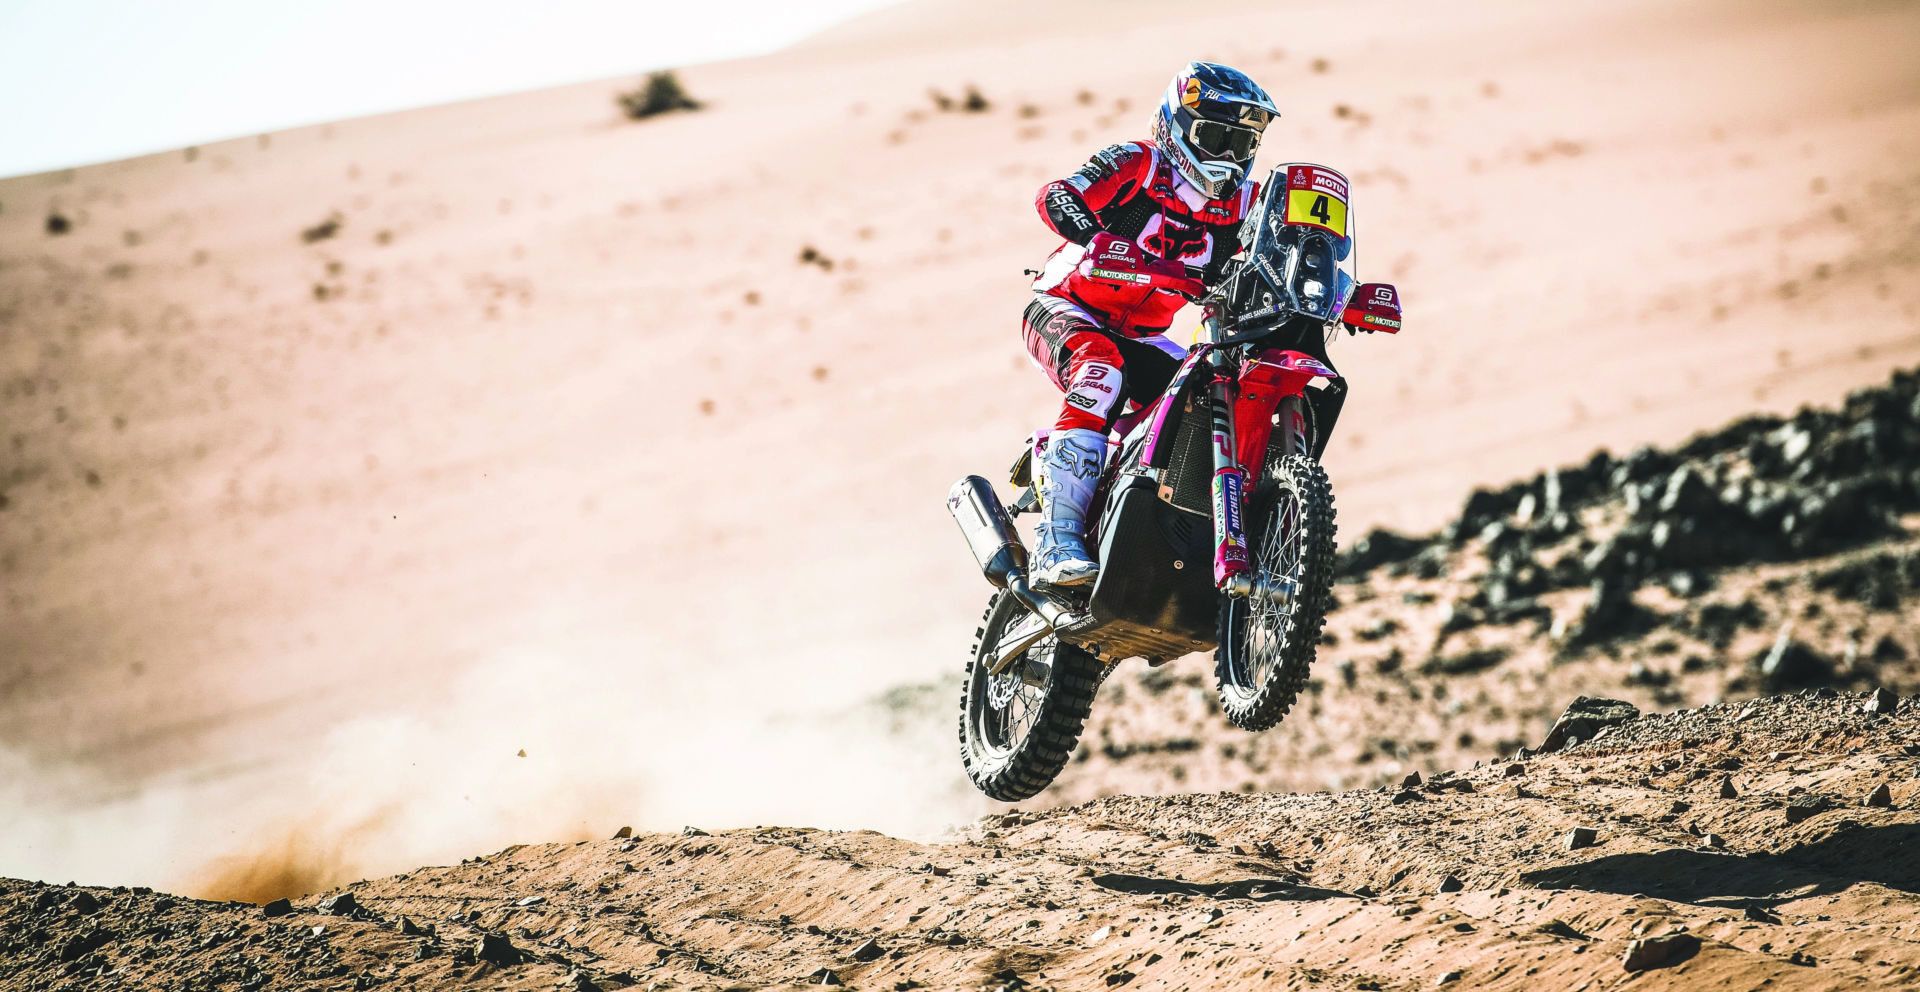 Daniel Sanders (4) during Stage 1B at the Dakar Rally. Photo by Rally Zone, courtesy GASGAS Factory Racing.